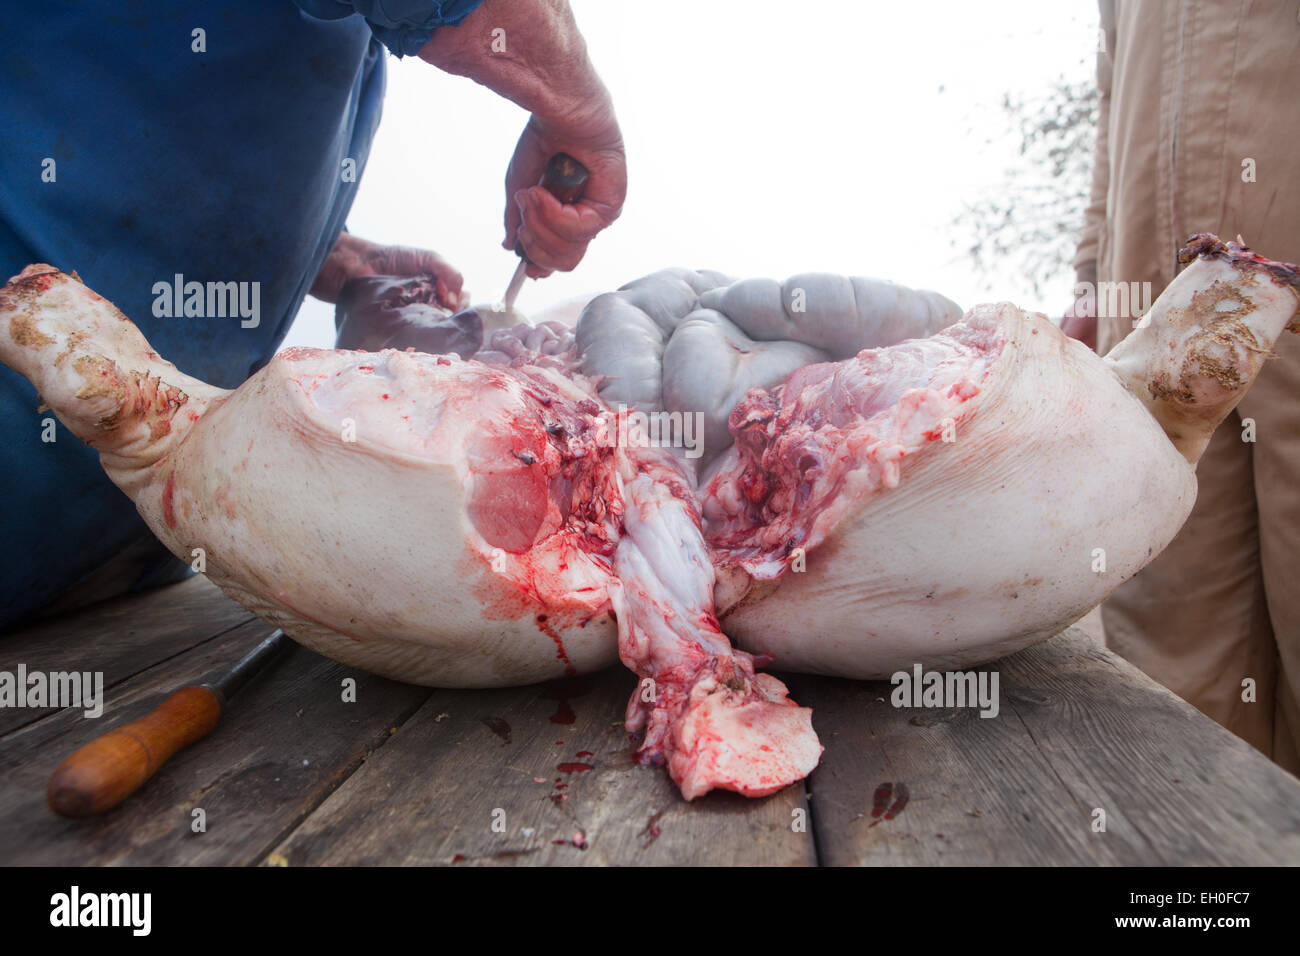 Traditional home slaughtering in a rural area.Carving-up the pig Stock Photo